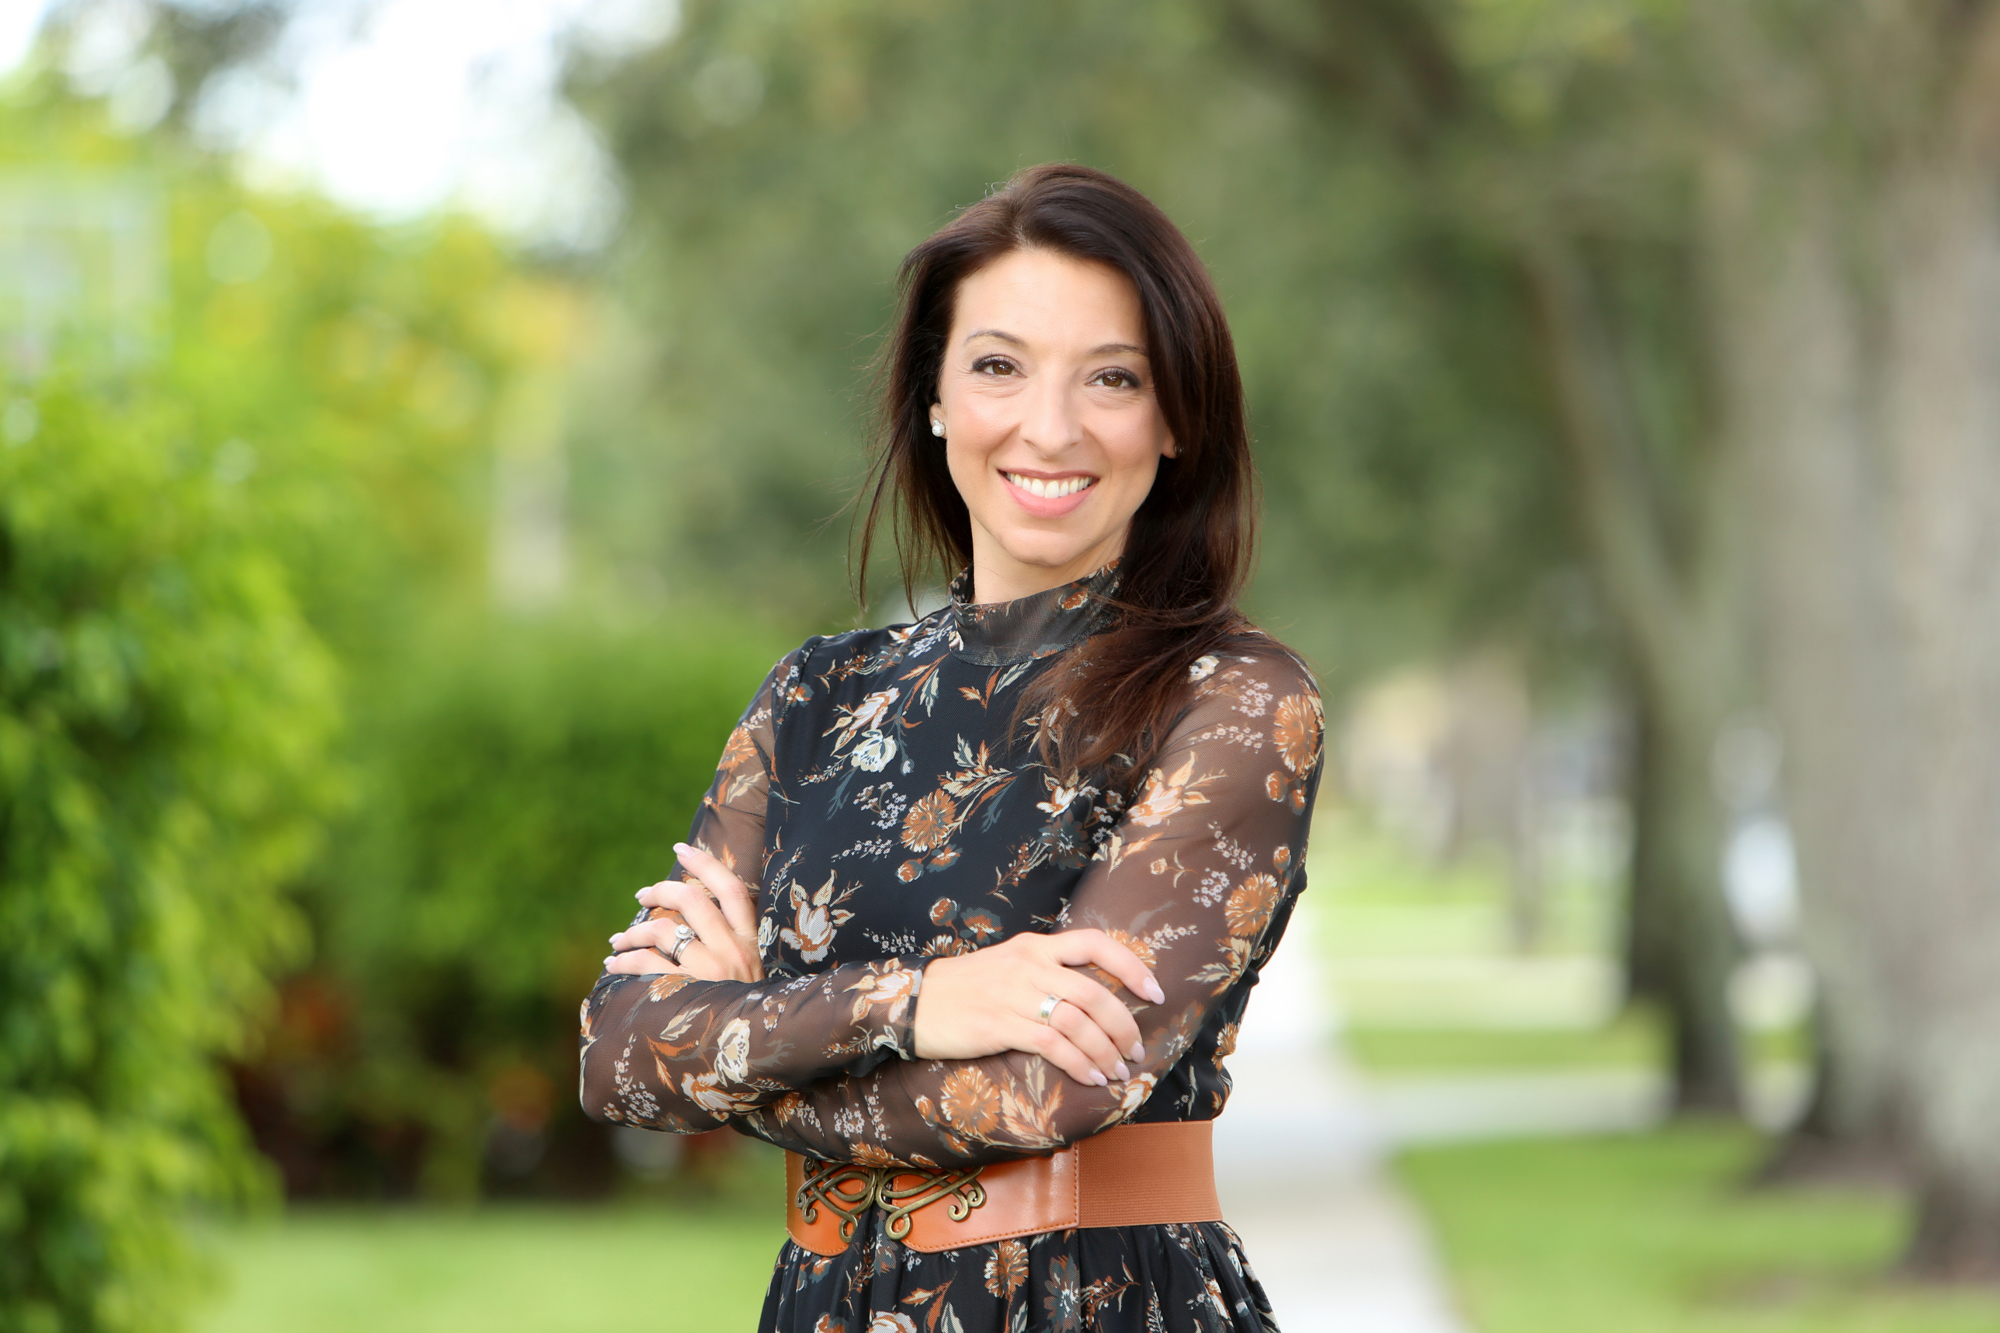 Stefania Pifferi. Erika Donalds, president and CEO of The Optima Foundation, based in Naples, is a leading advocate for charter schools in Florida.